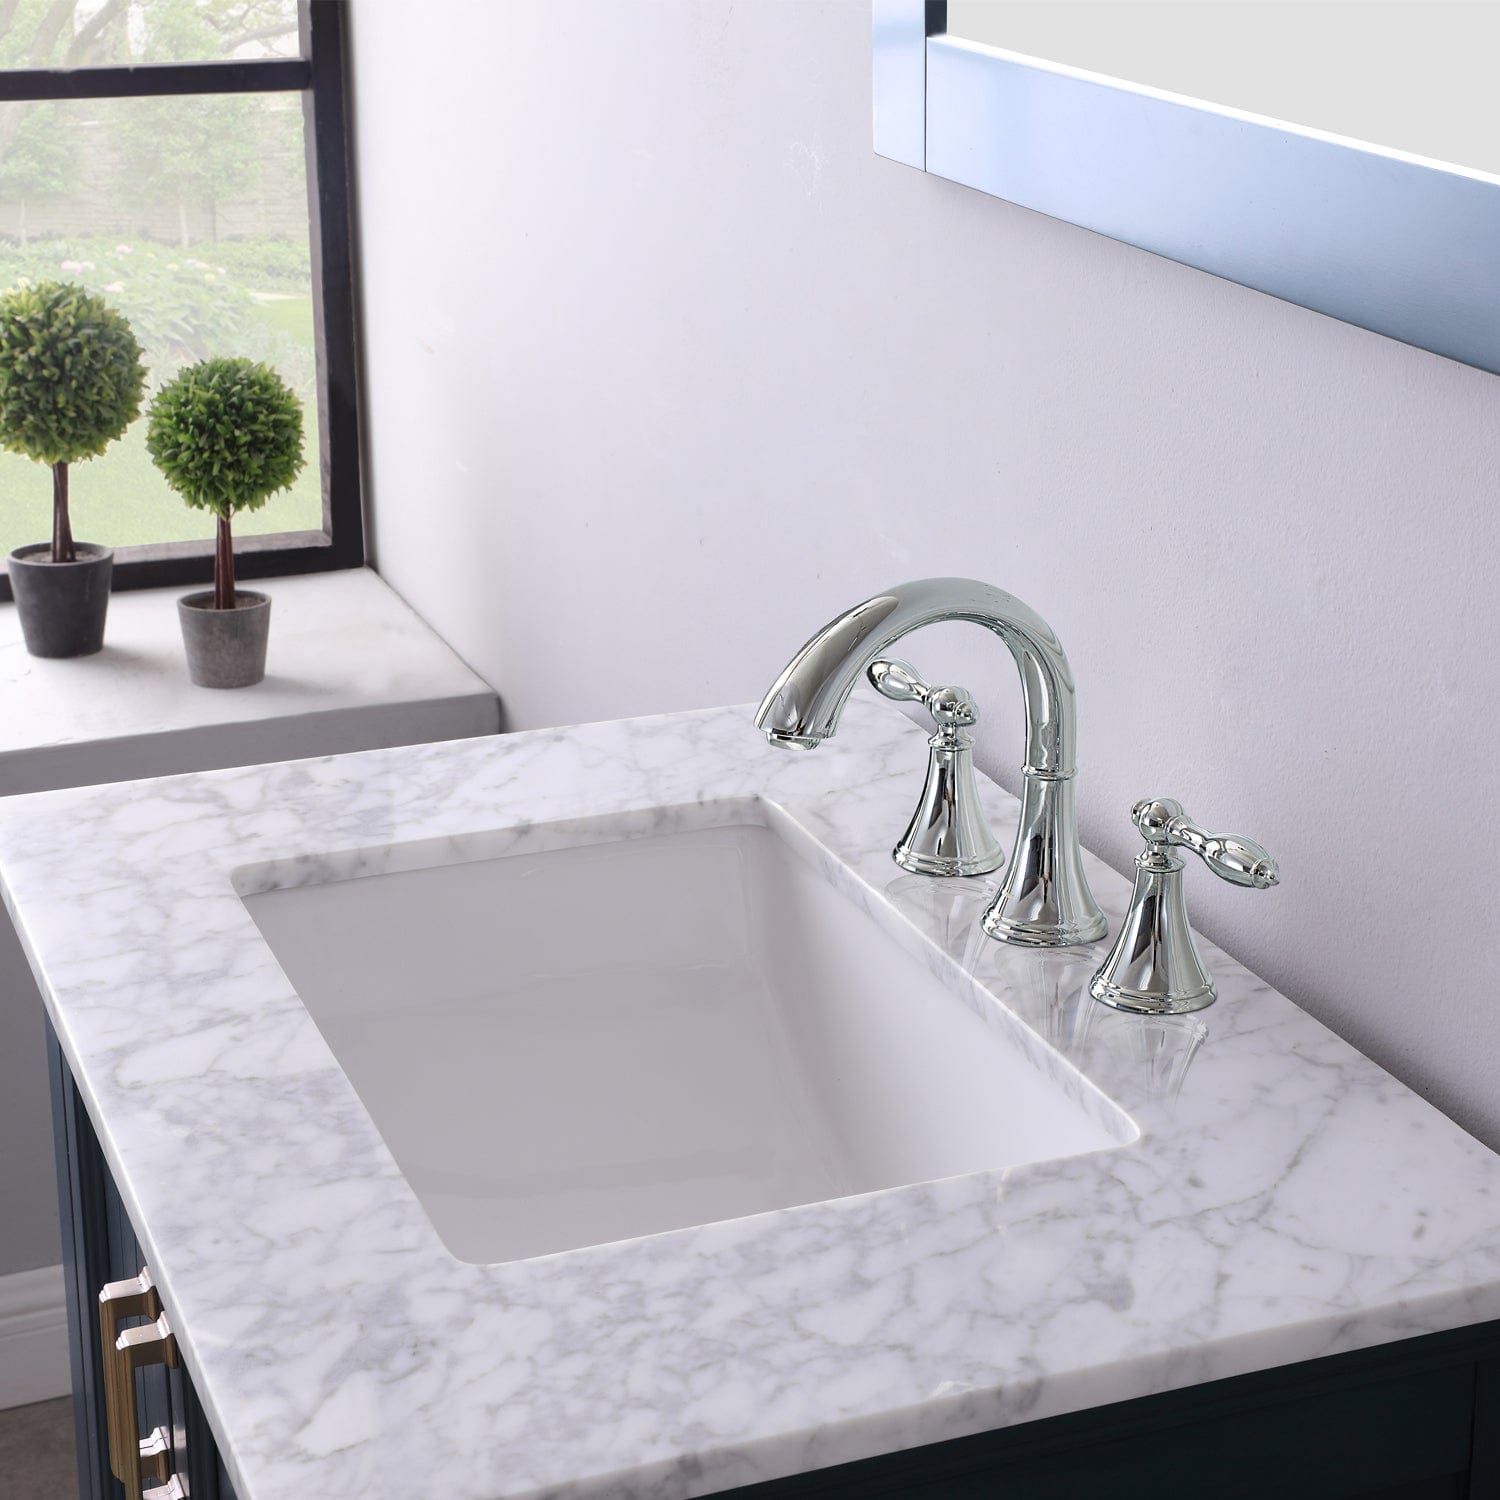 Altair Isla 30" Single Bathroom Vanity Set in Classic Blue and Carrara White Marble Countertop without Mirror 538030-CB-CA-NM - Molaix631112970747Vanity538030-CB-CA-NM